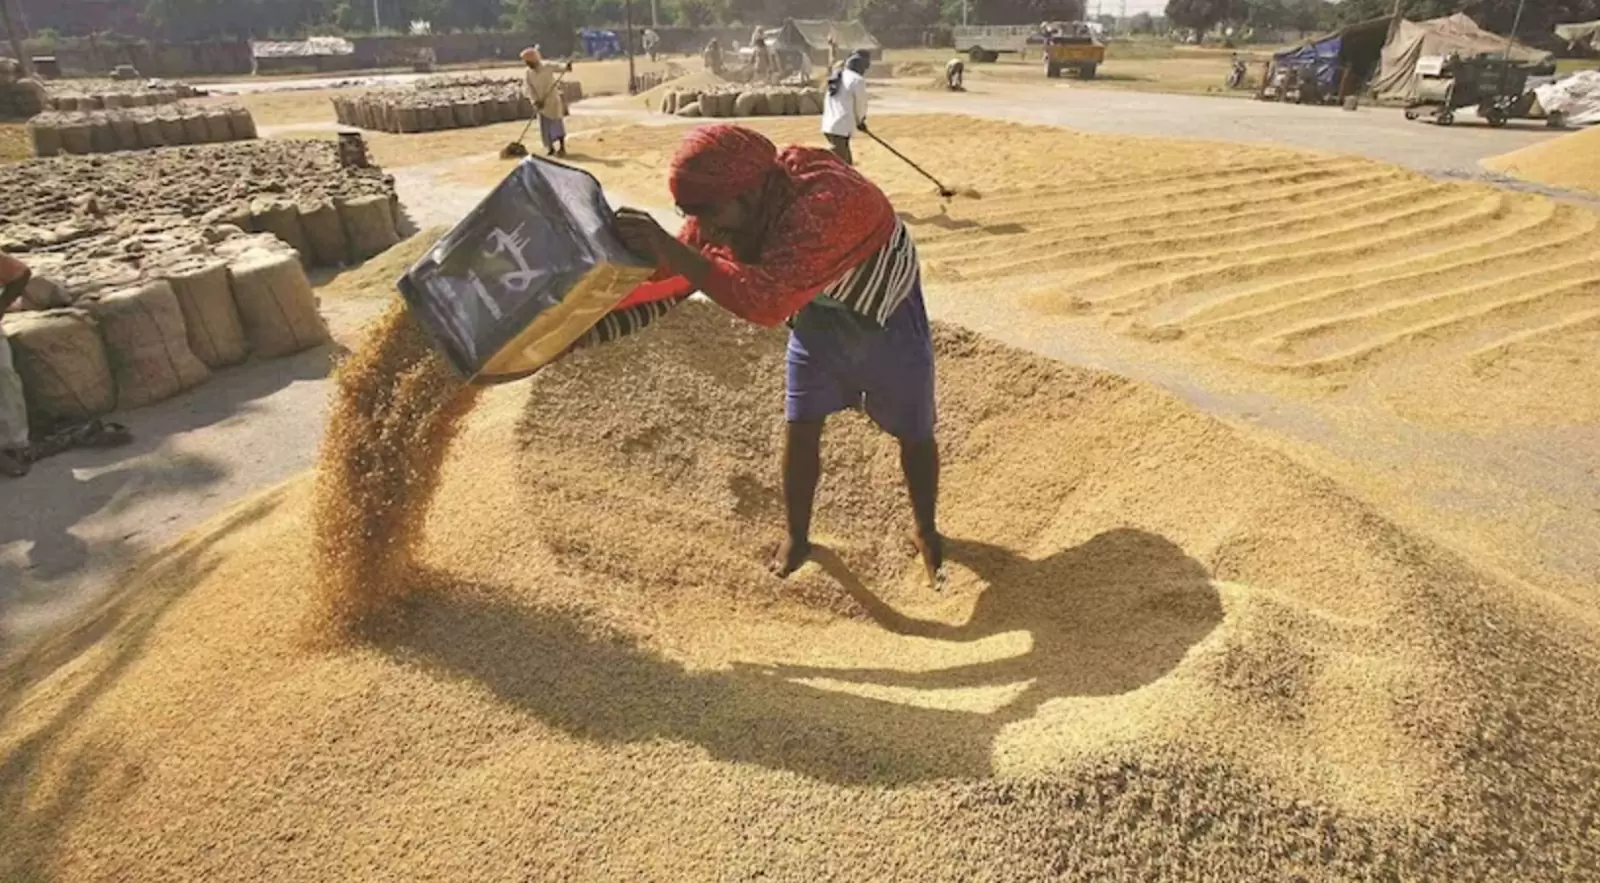 'There should be a permanent solution to the grain stock issue for food security'; G33 countries appeal to WTO members